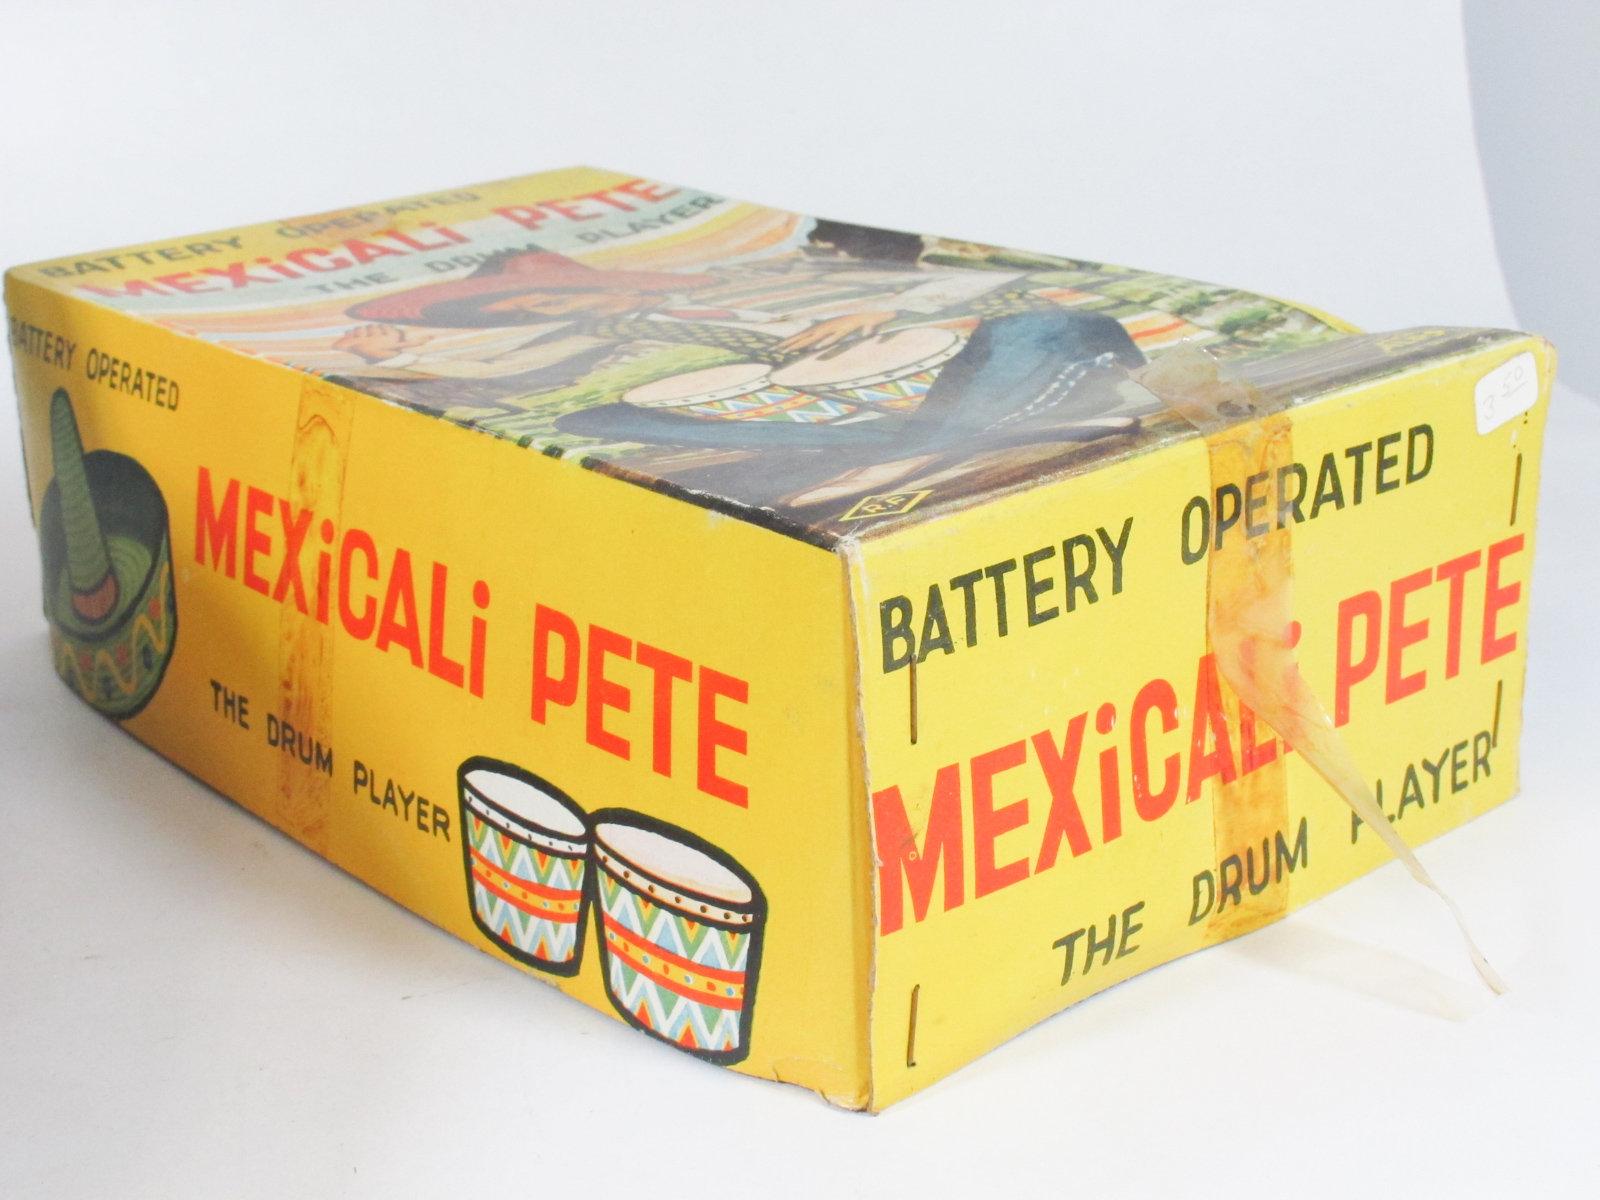 Japan Battery Operated Mexicali Pete Toy